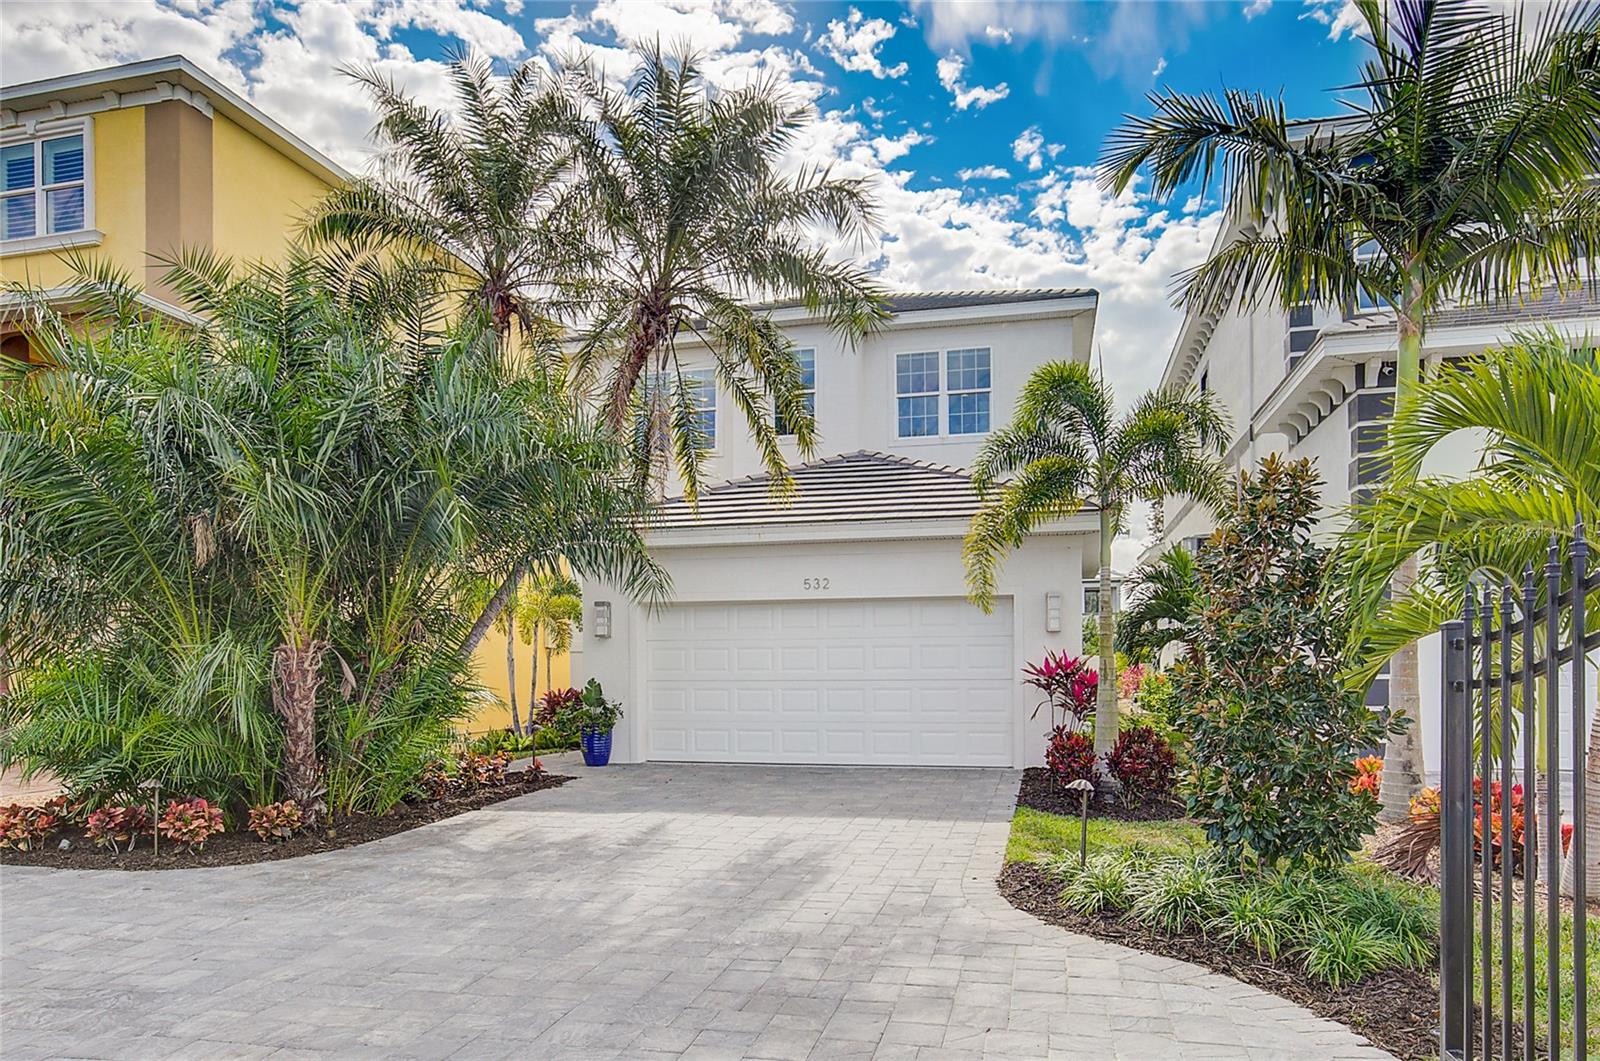 PRIVATE GATED ENTRANCE WITH TROPICAL FLORIDA FEEL AWAITS YOU!